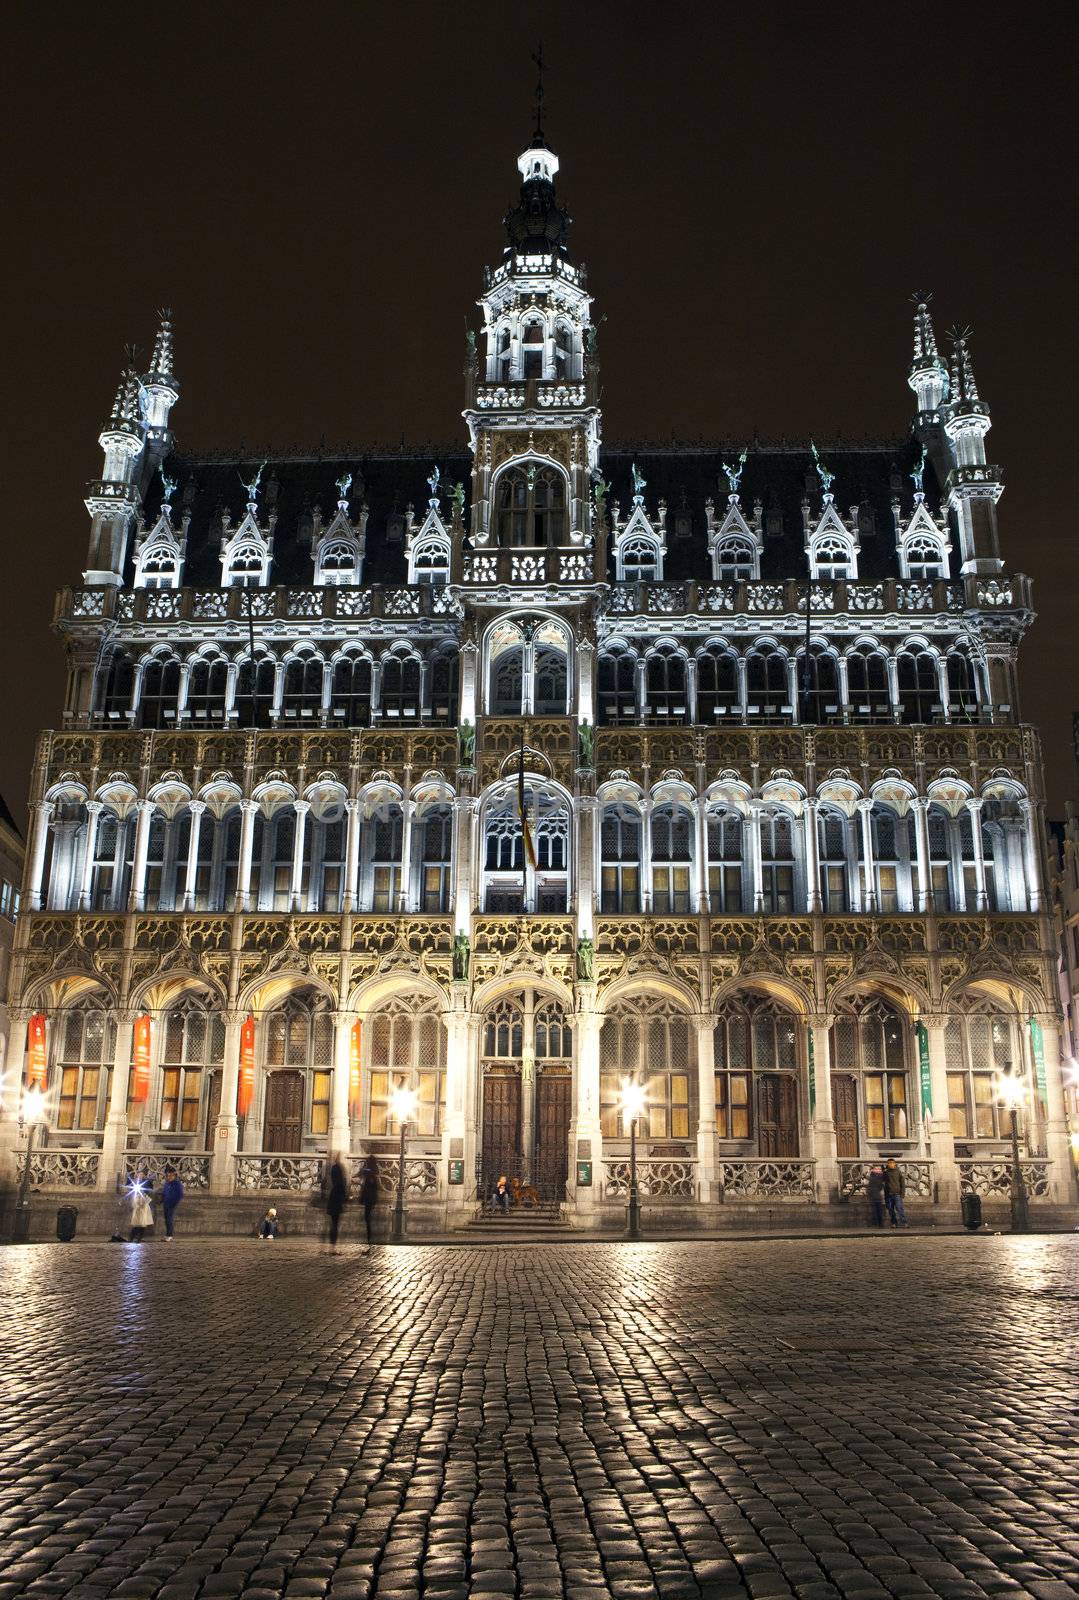 The Maison du Roi (King's House) in Grand Place, Brussels.